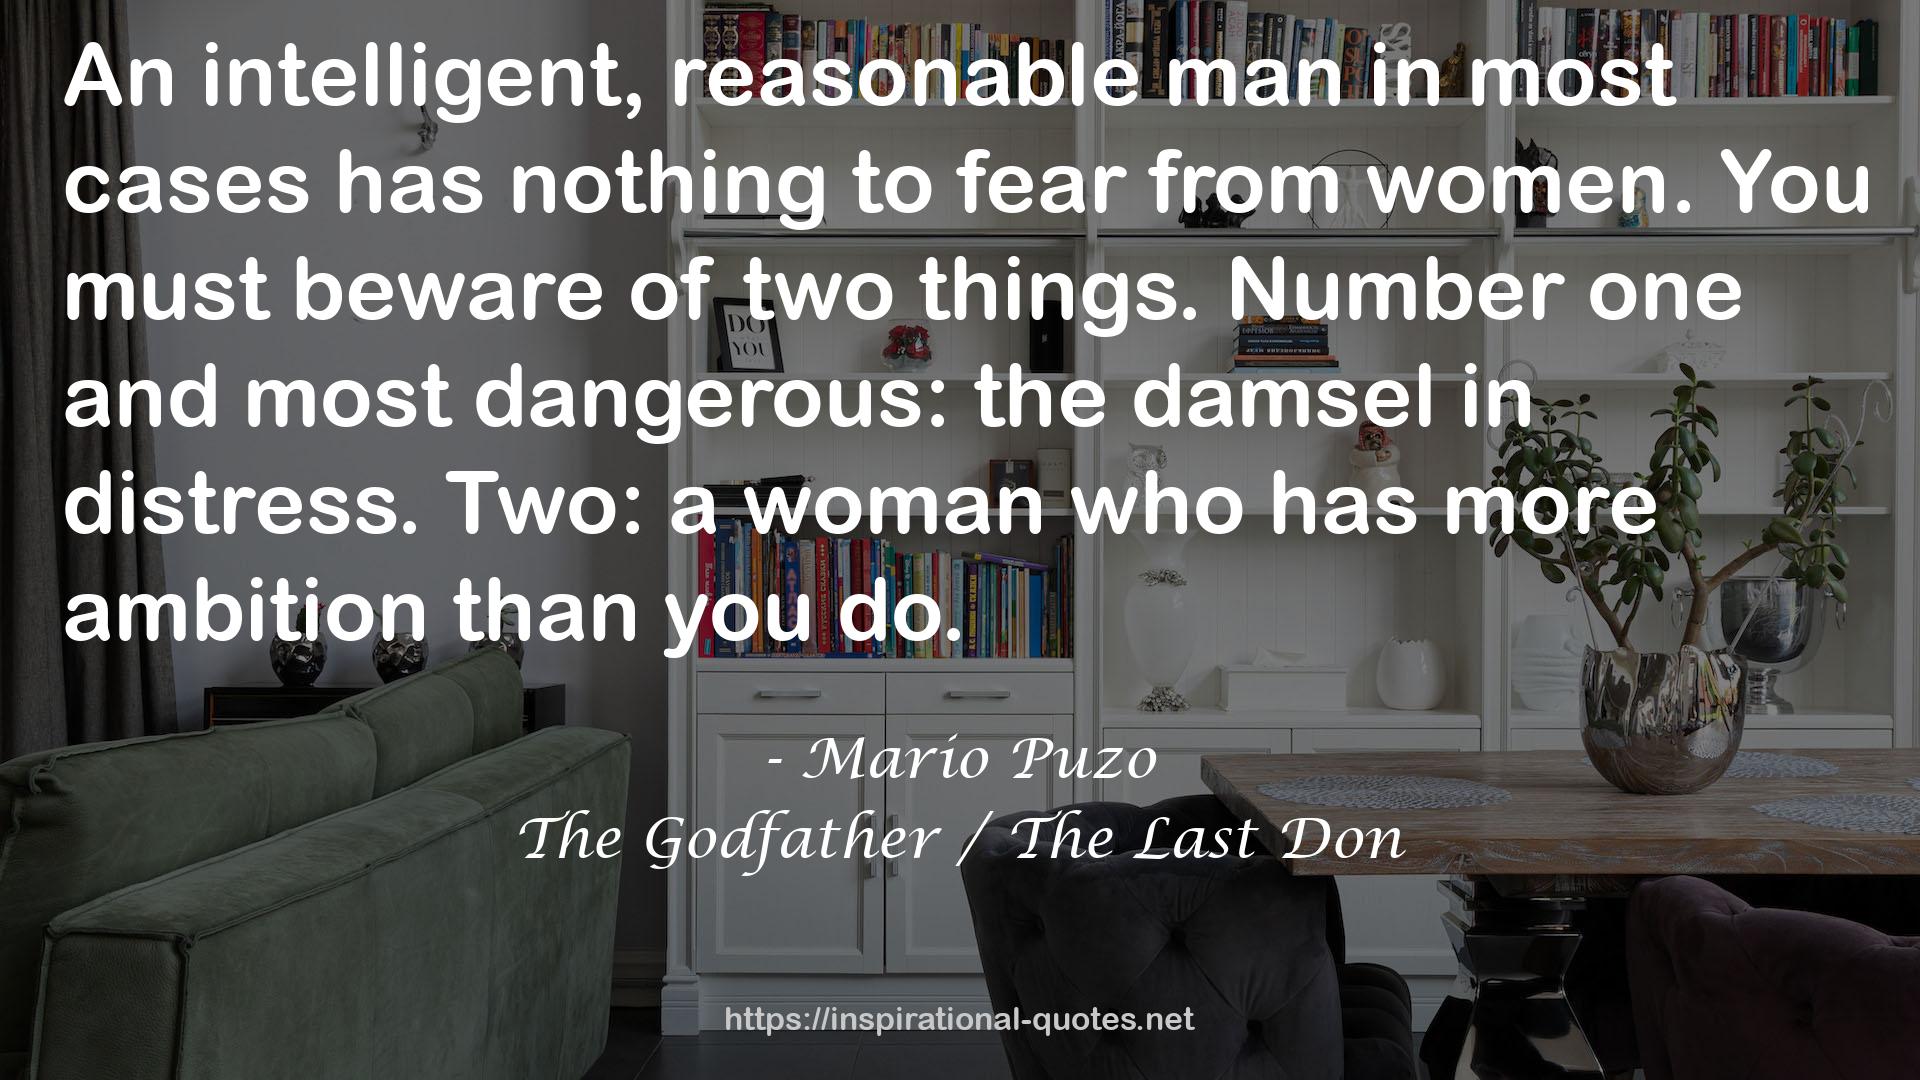 The Godfather / The Last Don QUOTES